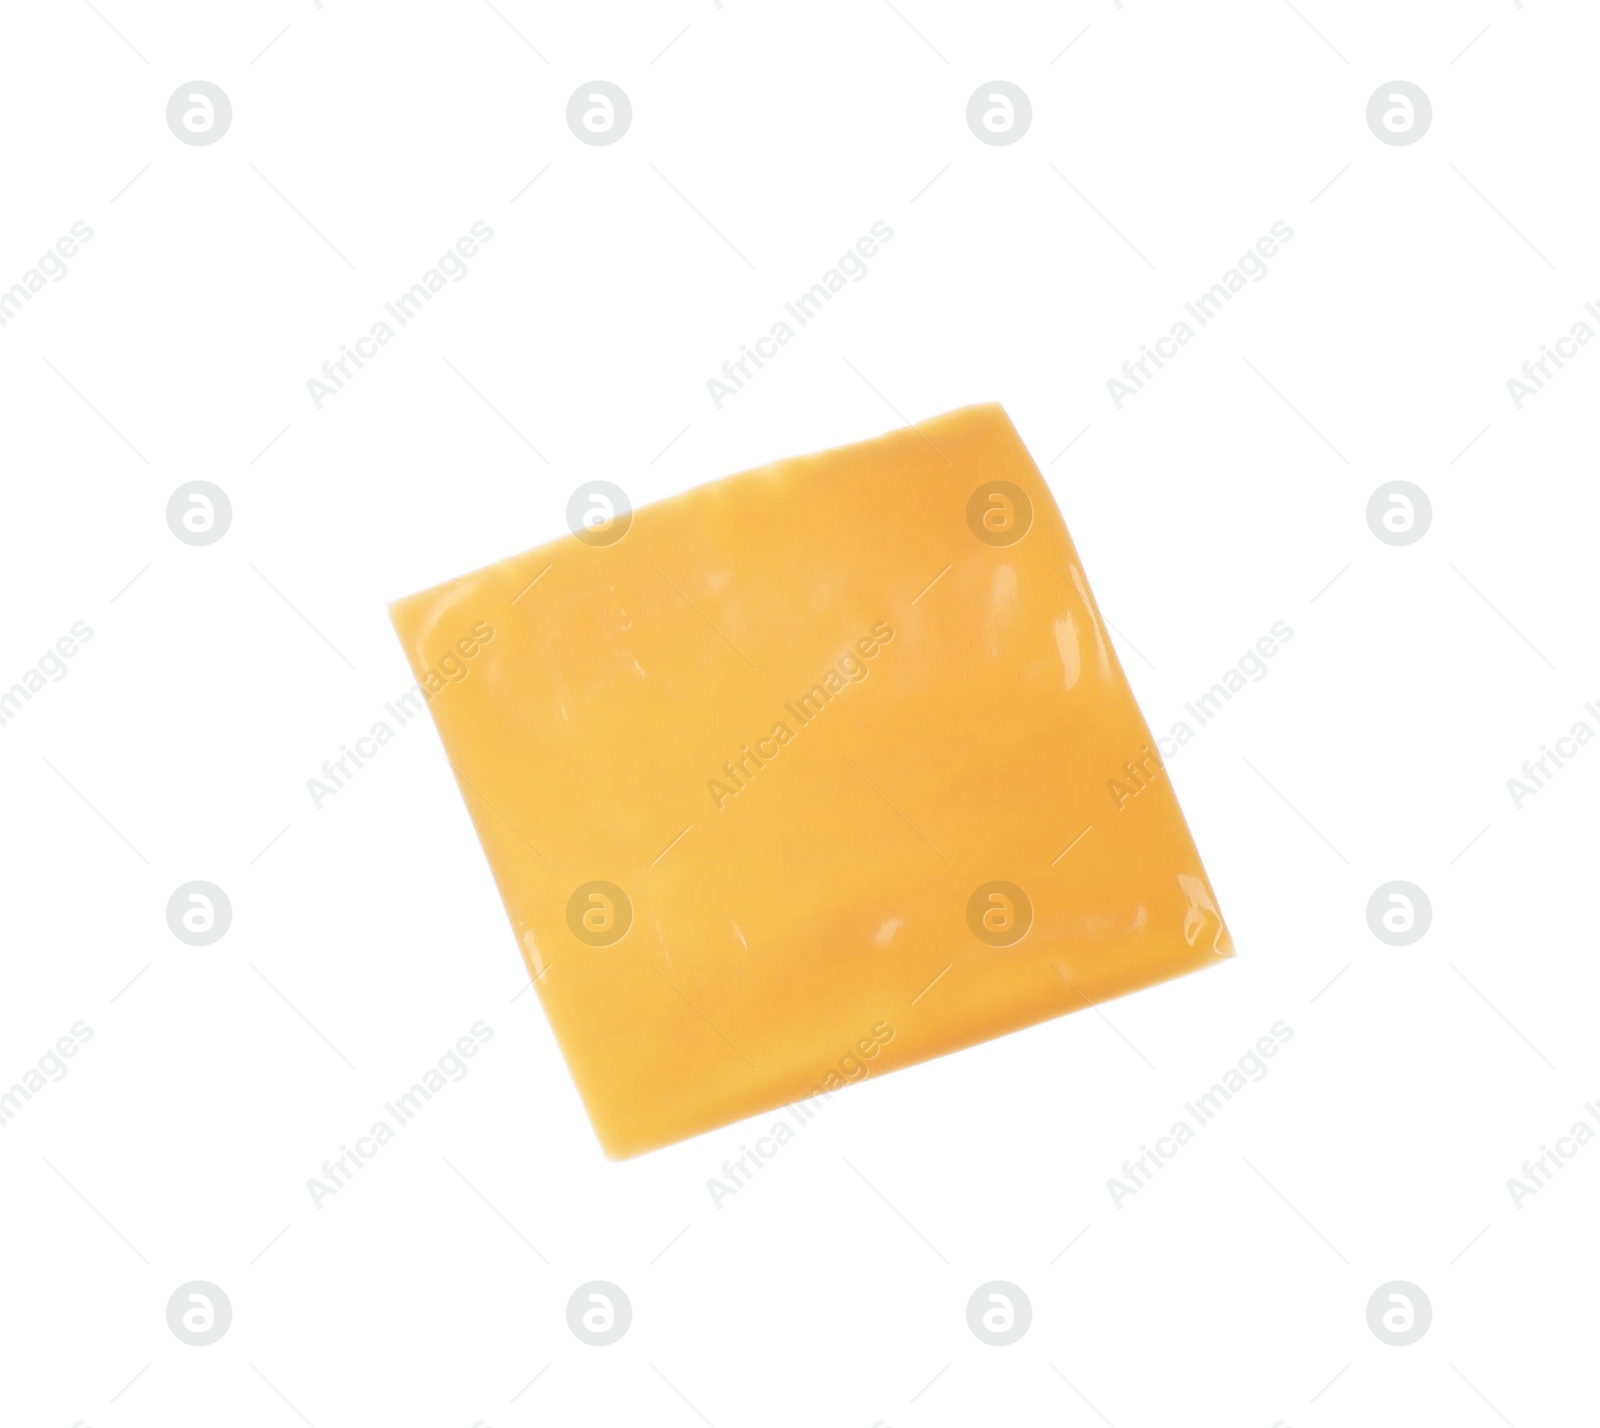 Photo of Slice of cheese for sandwich isolated on white